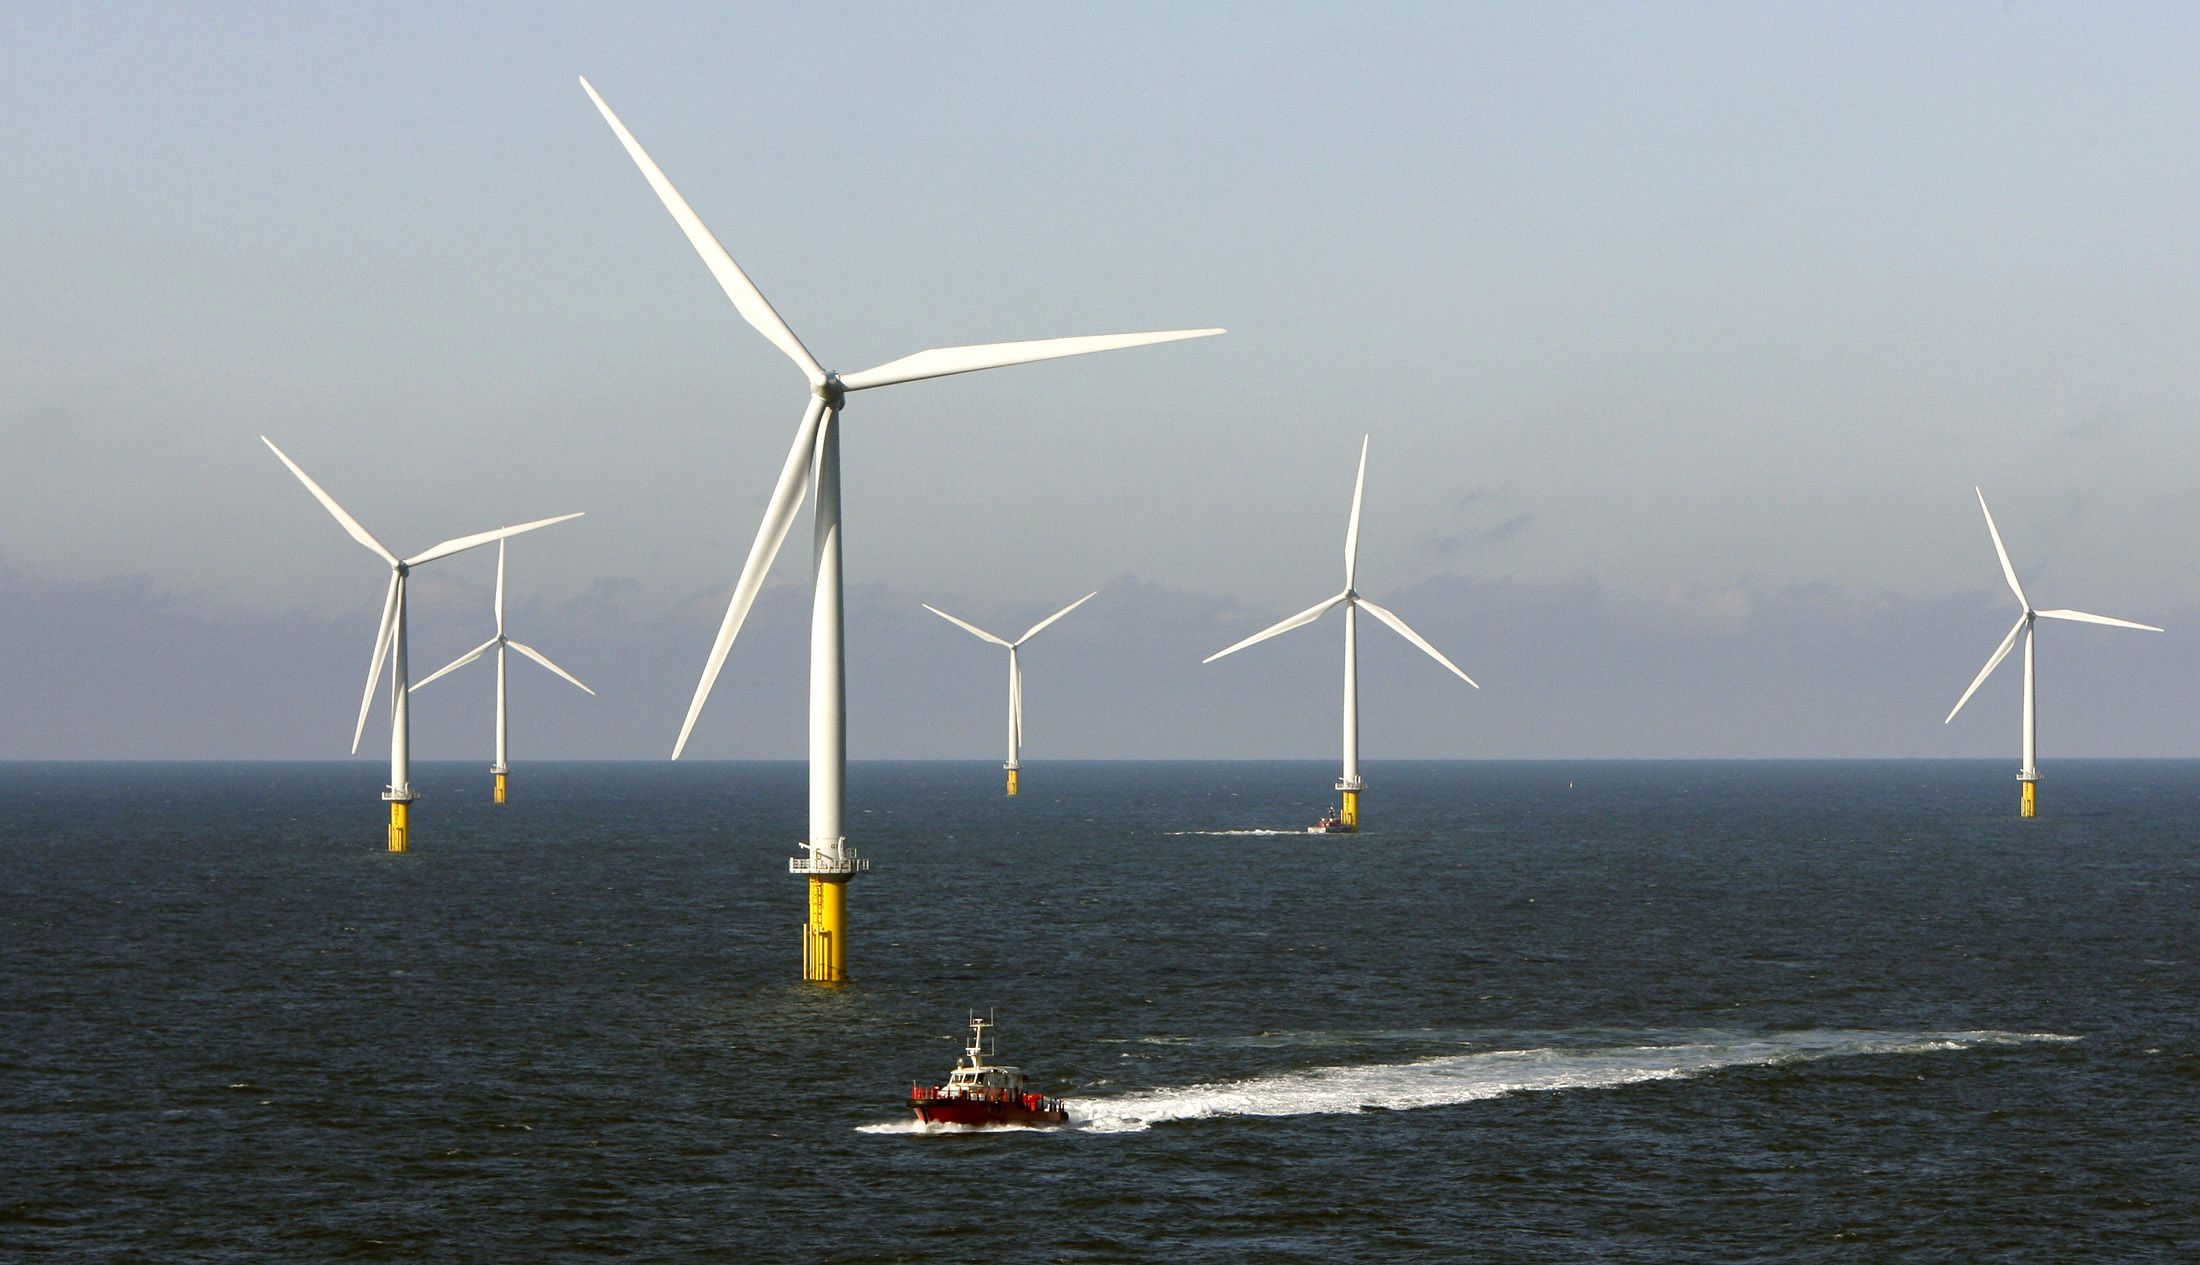 Energy for the Open Ocean Wind Turbines Could